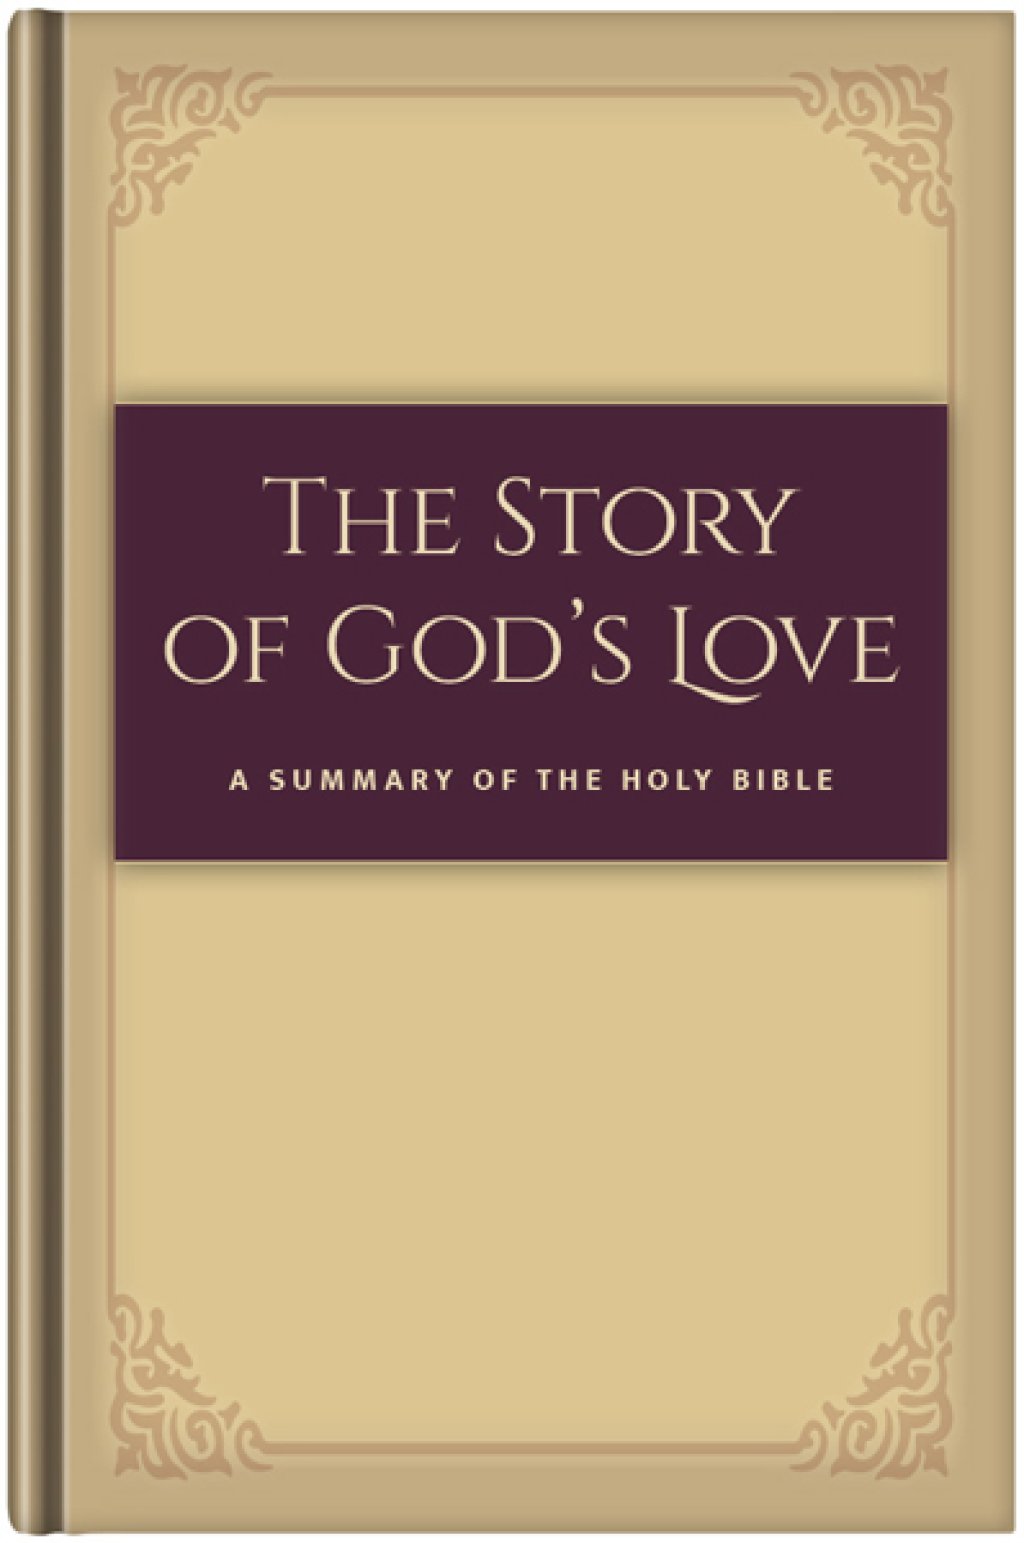 The Story of God's Love - A Summary of the Holy Bible.